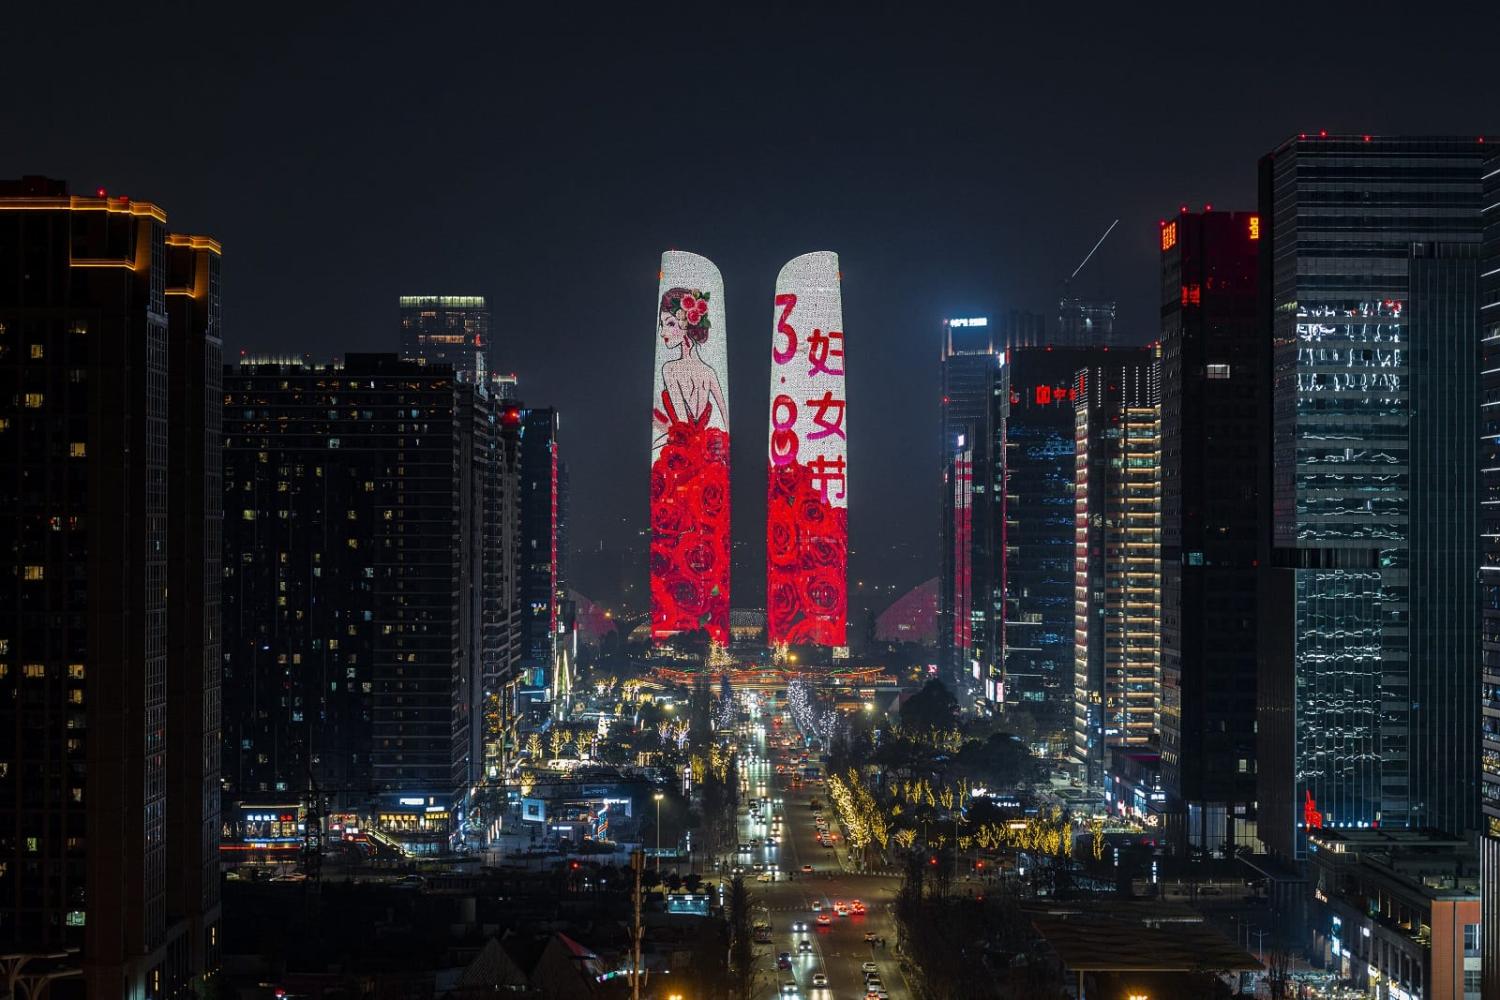 Twin towers in Chengdu, China, are illuminated during a celebration of International Women's Day, 8 March 2022 (Liu Yan/VCG via Getty Images)